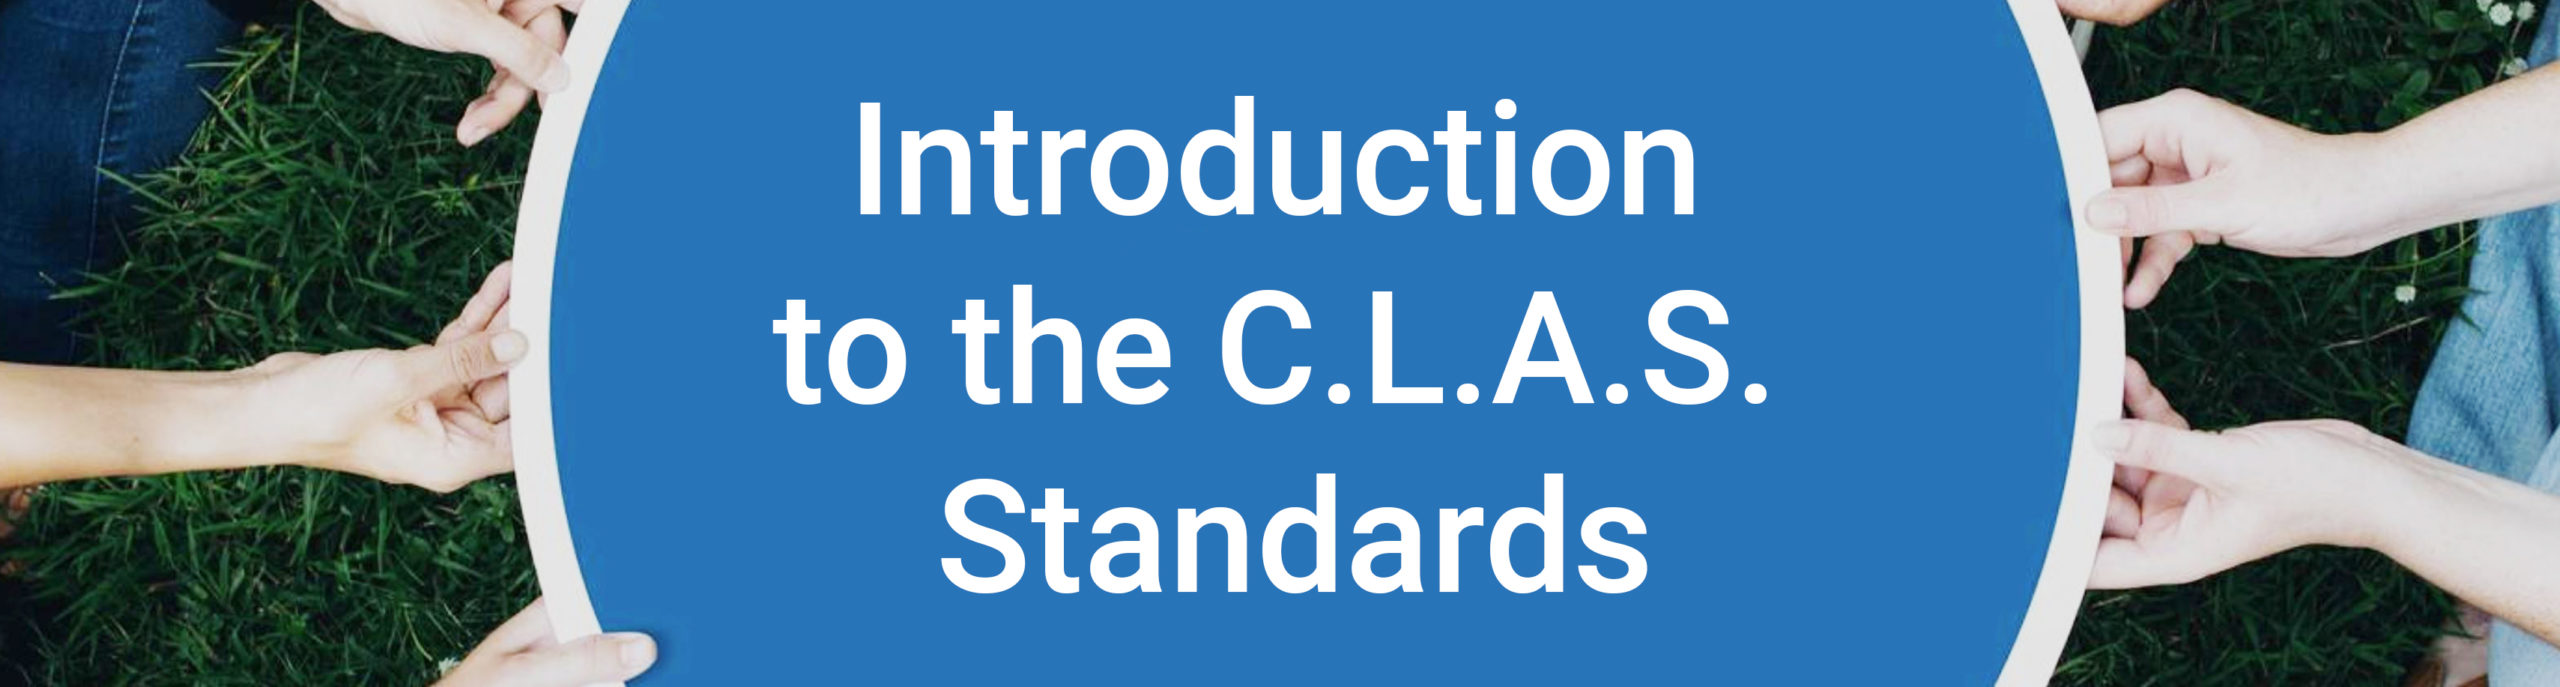 Clas Overview Banner 9 Scaled